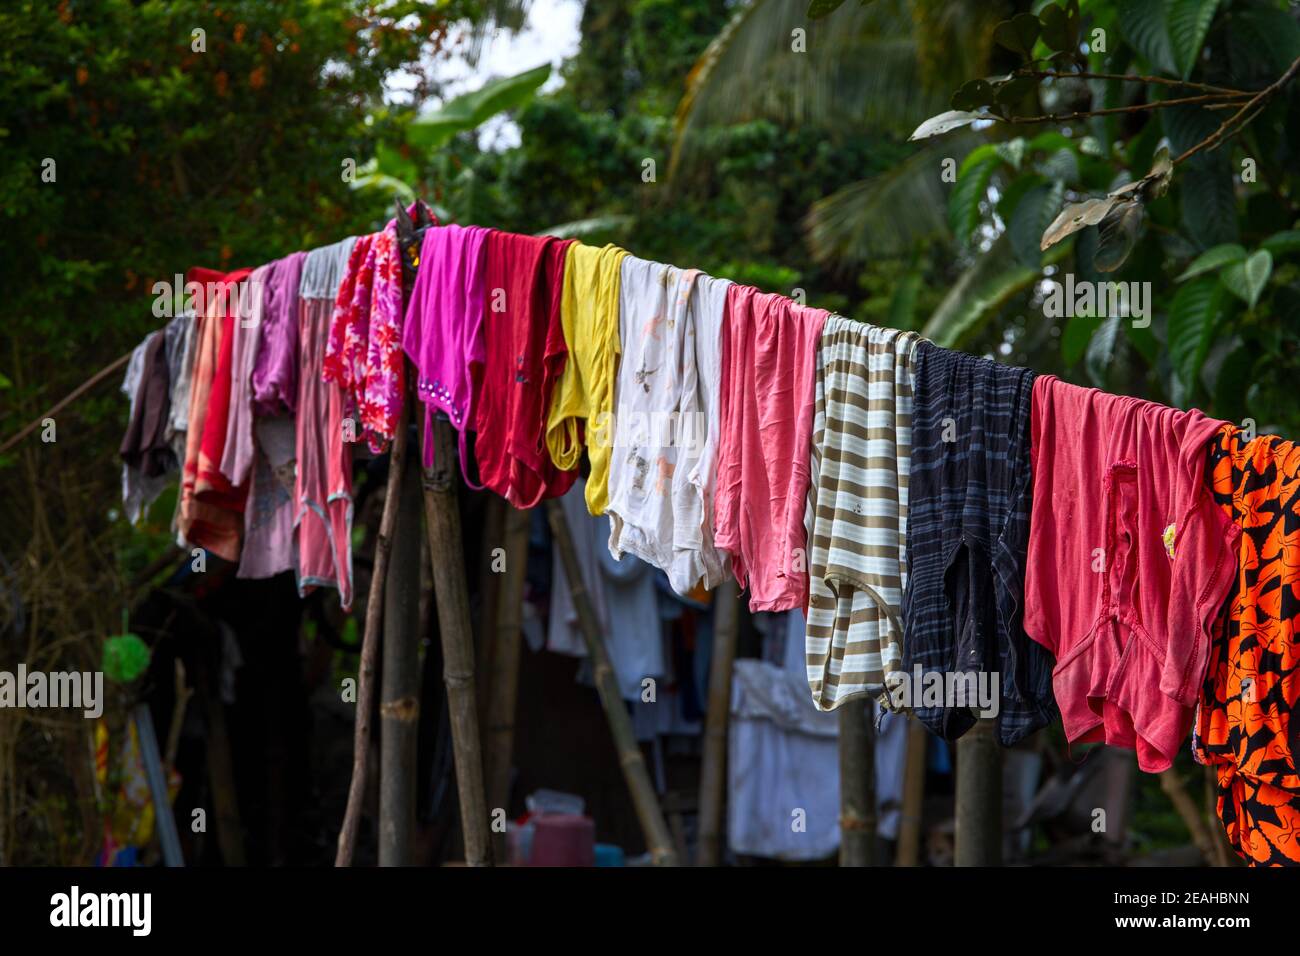 Colorful clothes hanging on rope in green garden. Multicolored